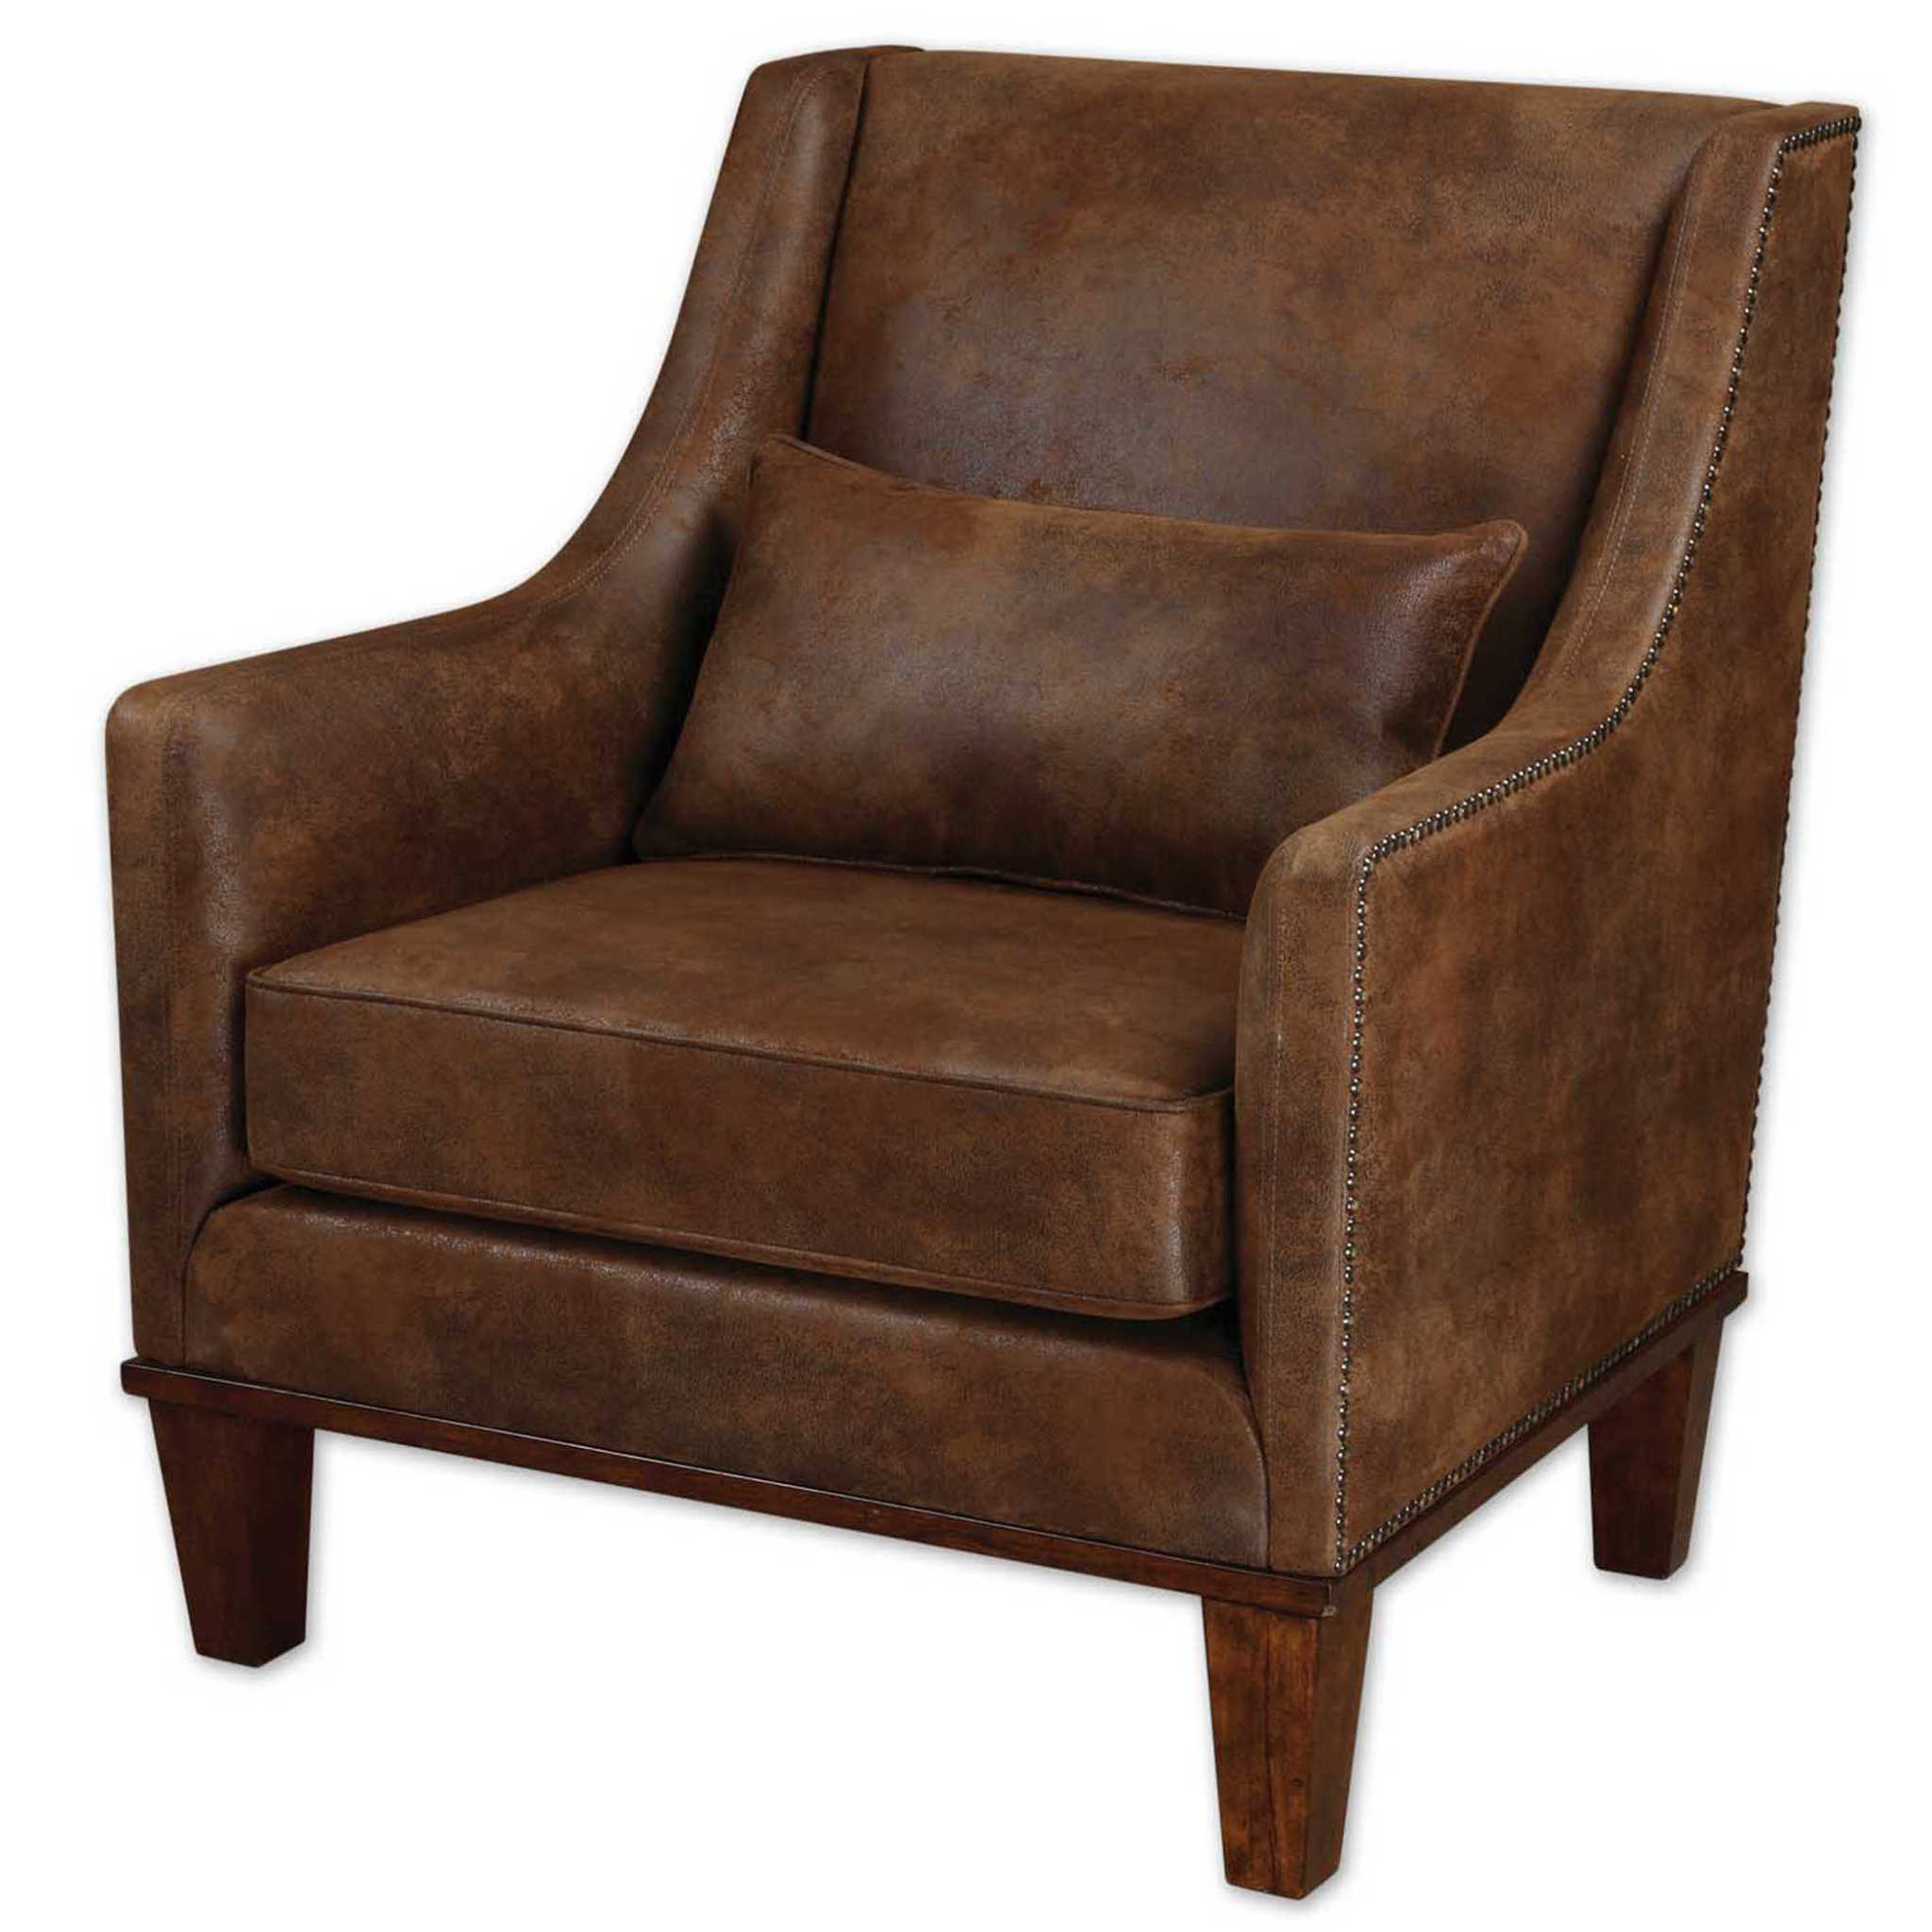 Clay Armchair, 33 x 37 x 35 Furniture Available for Local Delivery or Pick Up